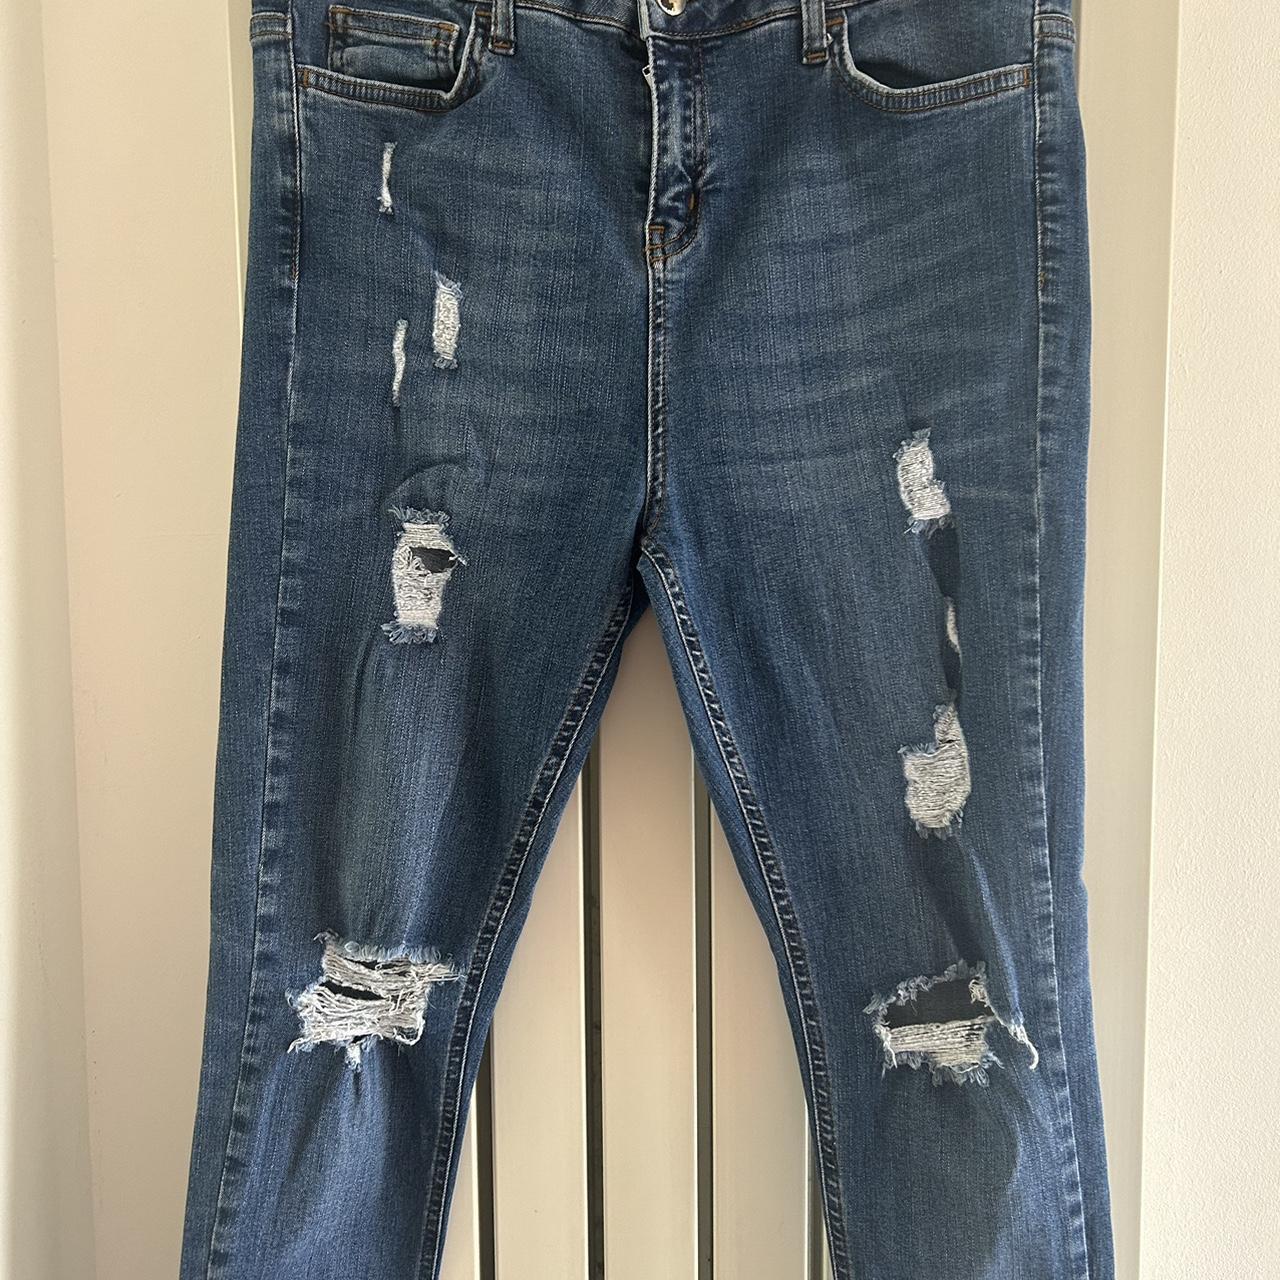 Mens HERA ripped jeans 30R excellent condition - Depop